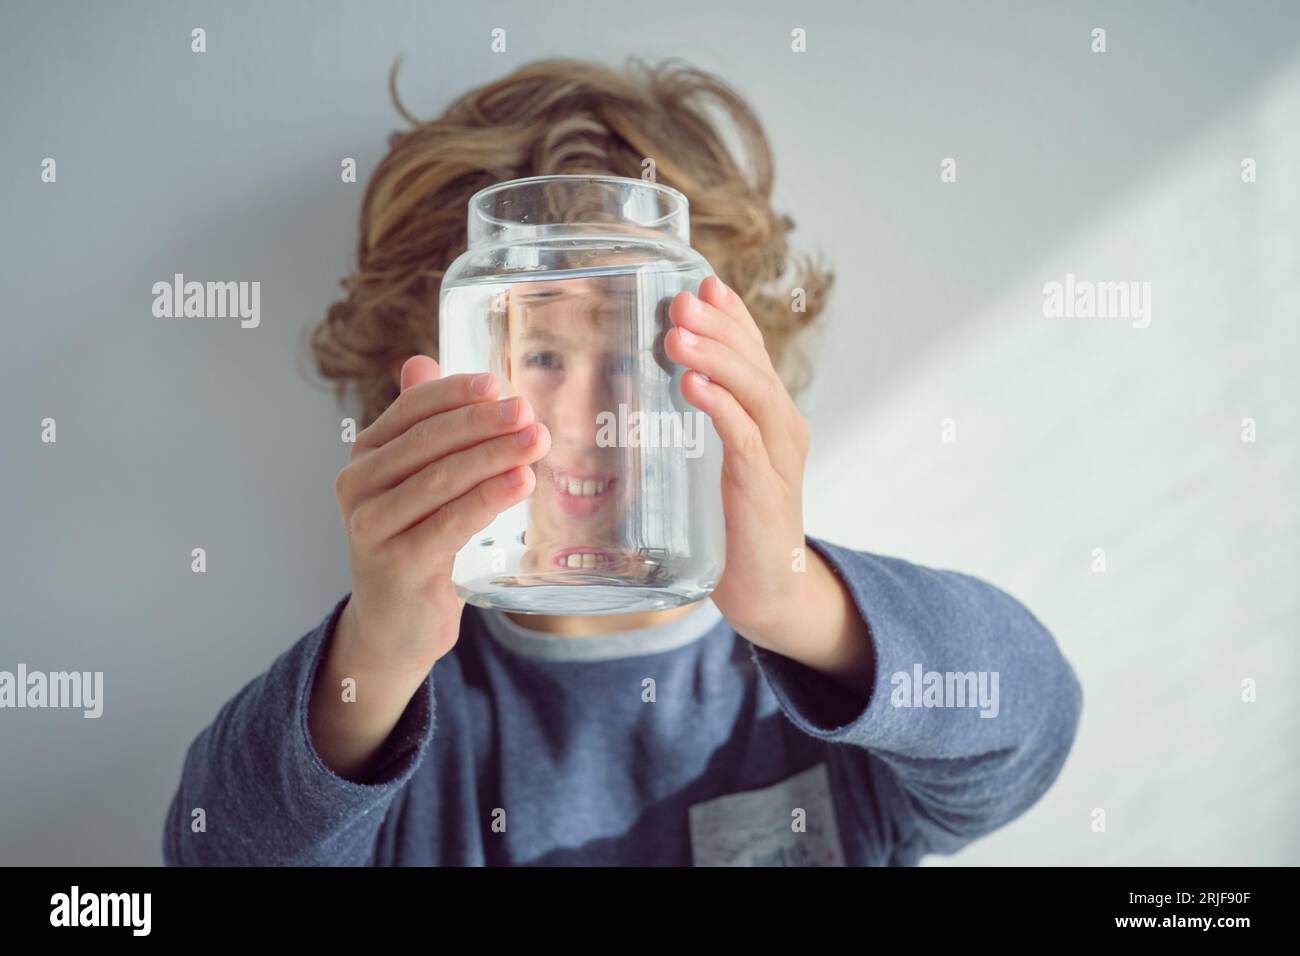 Cheerful blond haired kid looking through glass transparent bottle filled with clean water and holding jar against face near white background Stock Photo